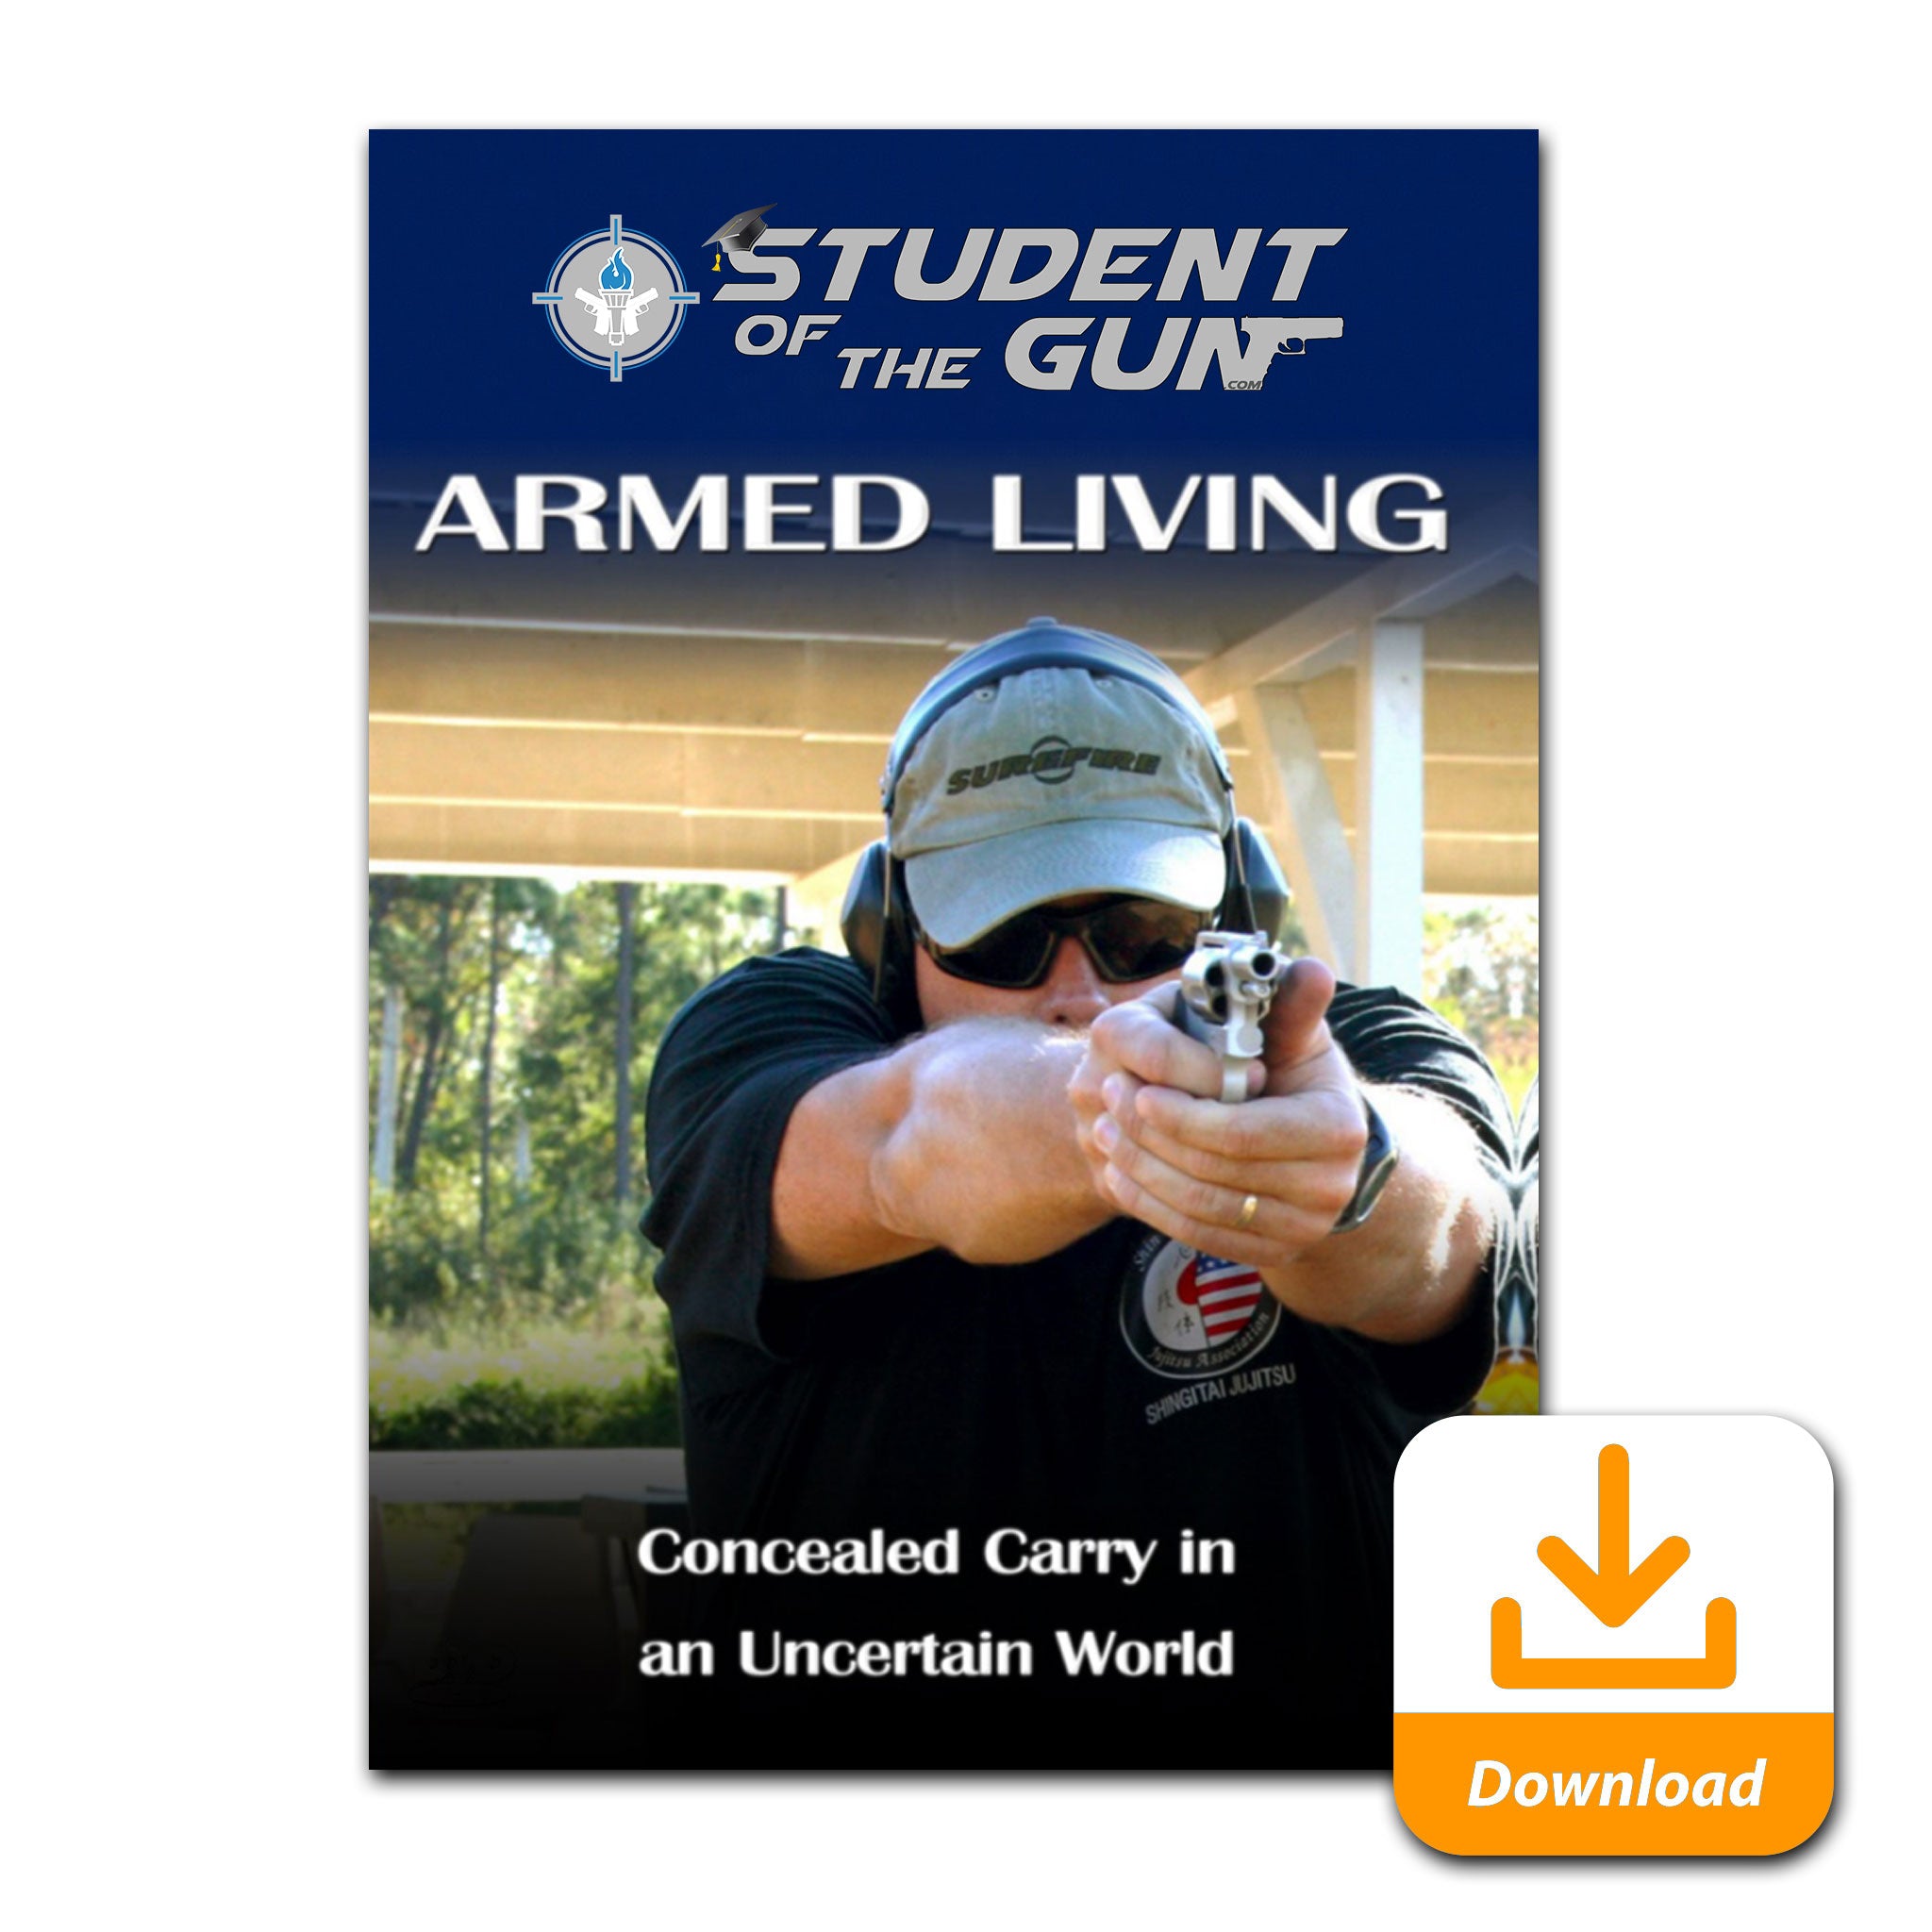 Armed Living: Concealed Carry in an Uncertain World [Digital Video]